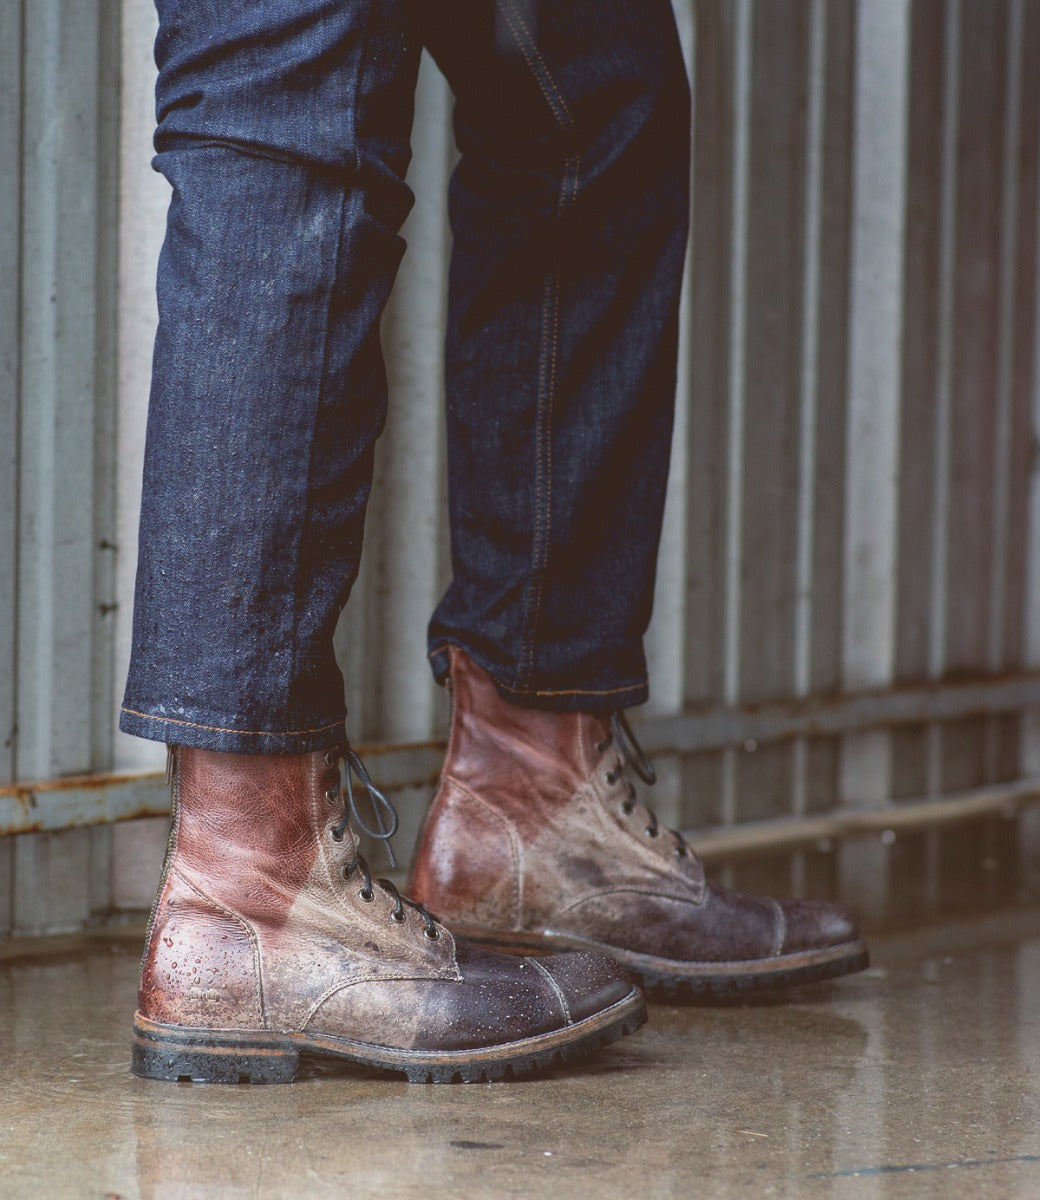 A close-up of a person's lower legs and feet wearing Bed Stu Protege Trek Teak Black Rustic Rust BFS boots with a Vibram outsole and blue jeans, standing on a wet surface.